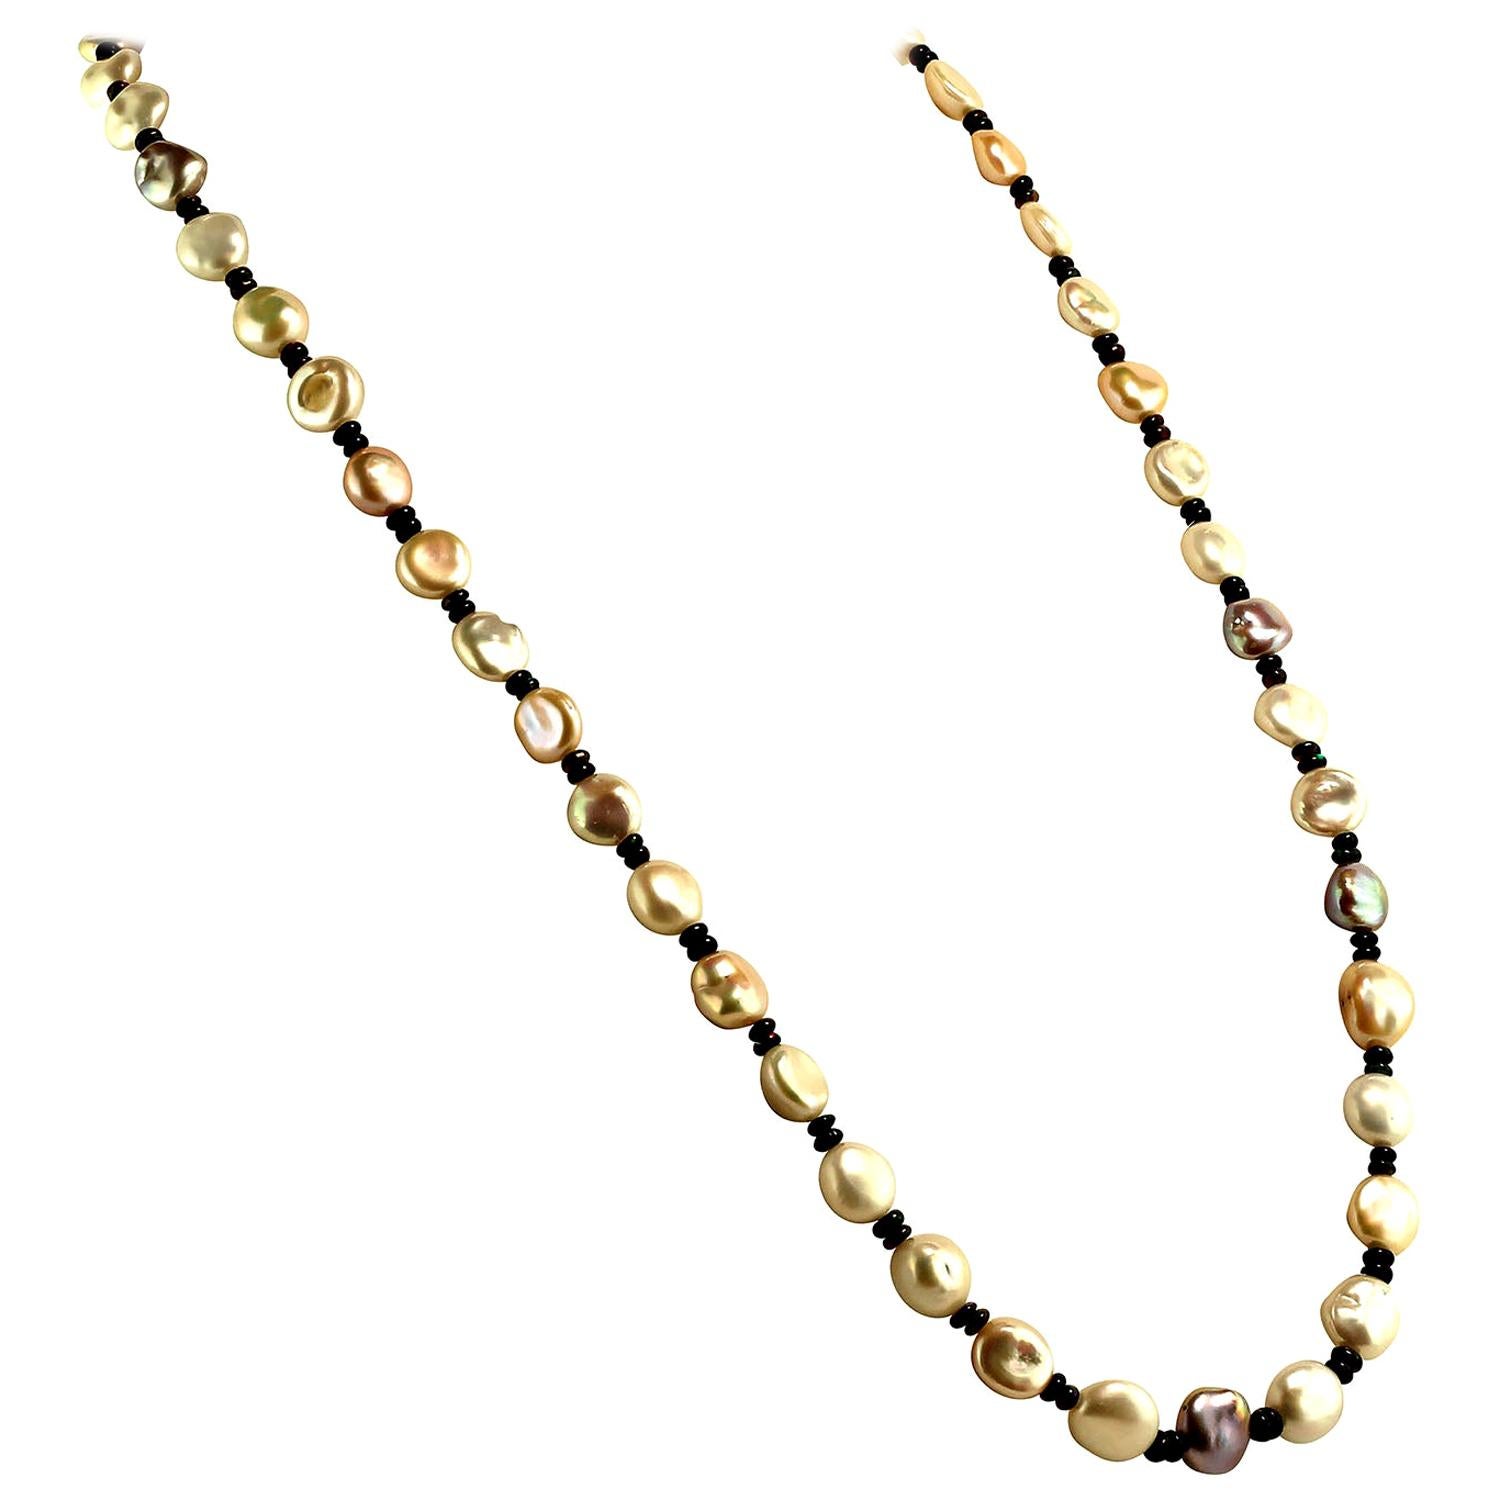 28 Inch necklace of glowing, iridescent second harvest Freshwater Pearls.  These gorgeous natural colored Pearls are accented with Black Opal rondelles which produce lovely flashes of red, green, and blue. At 28 inches this  necklace can ONLY be